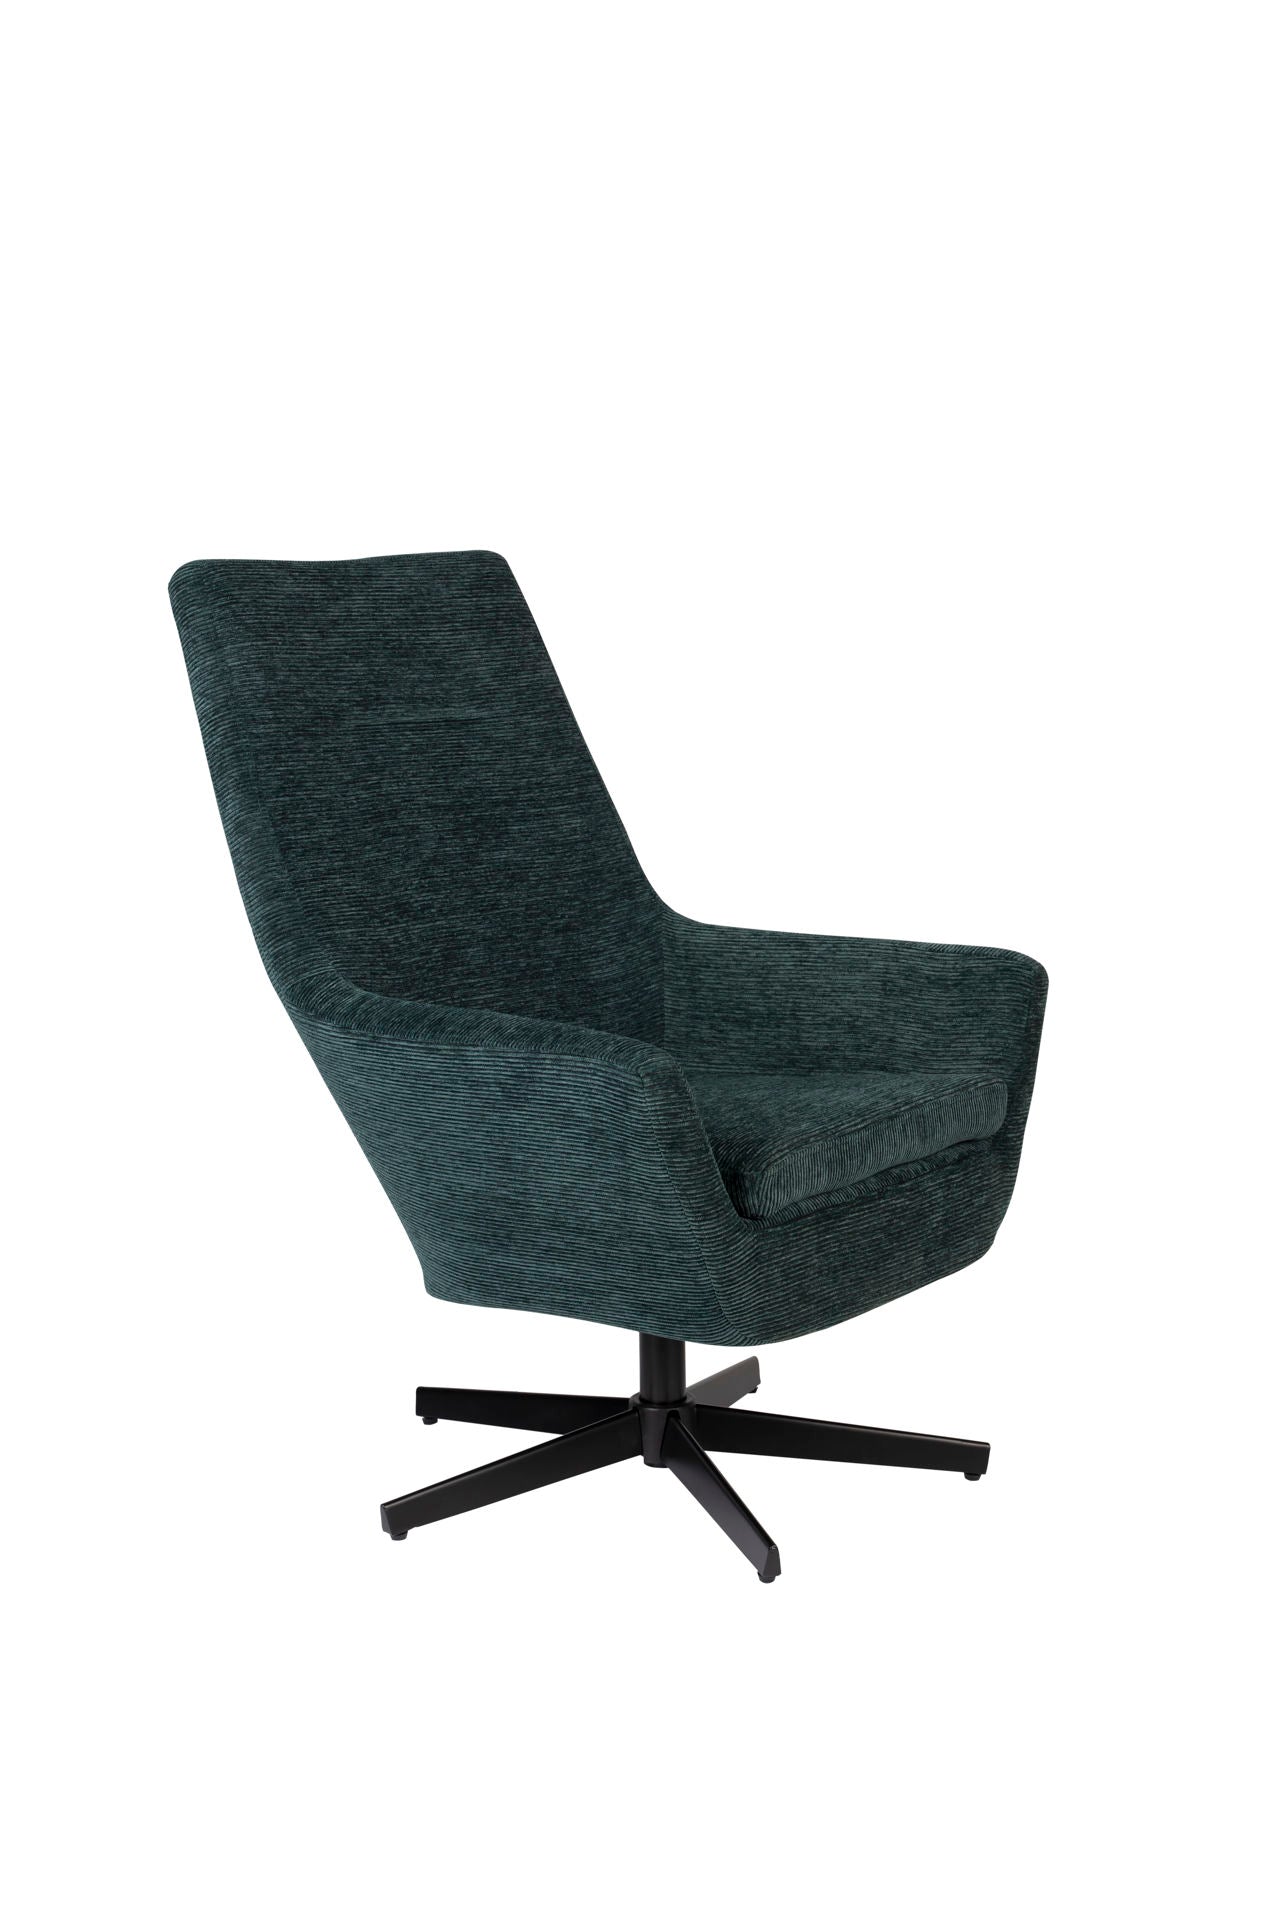 Nancy's Claiborne Lounge Chair - Industrial - Green - Polyester, Plywood, Iron - 79 cm x 76 cm x 98 cm